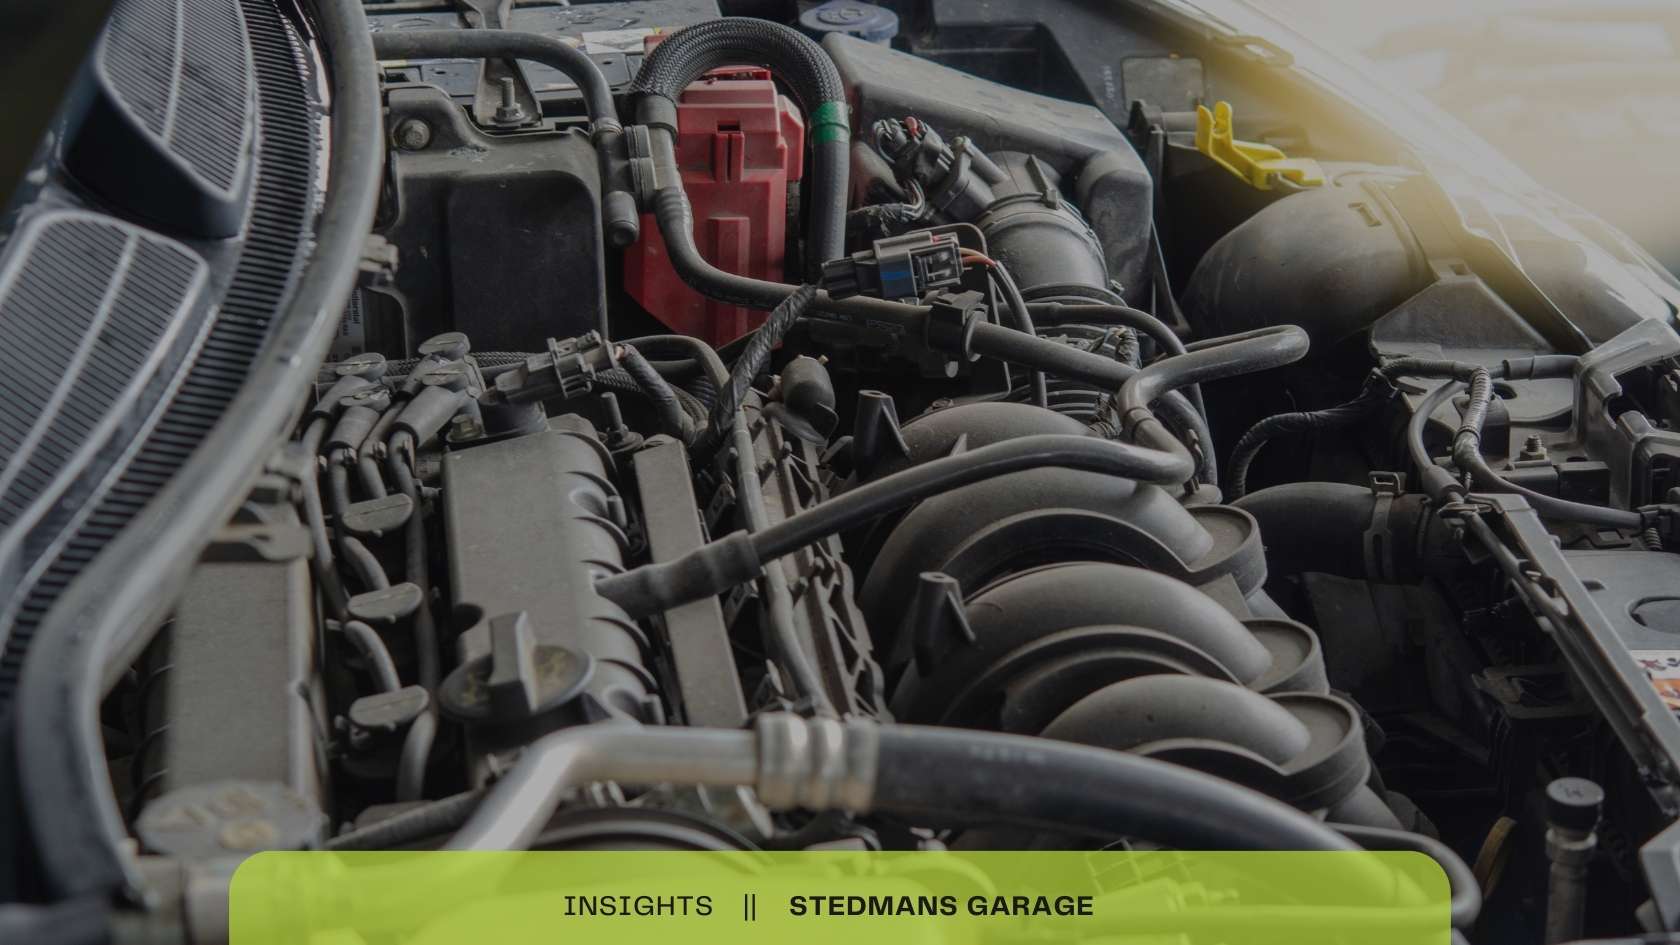 Understanding SEAT Engine Misfire Issues, with Stedmans Garage located in Worthing.